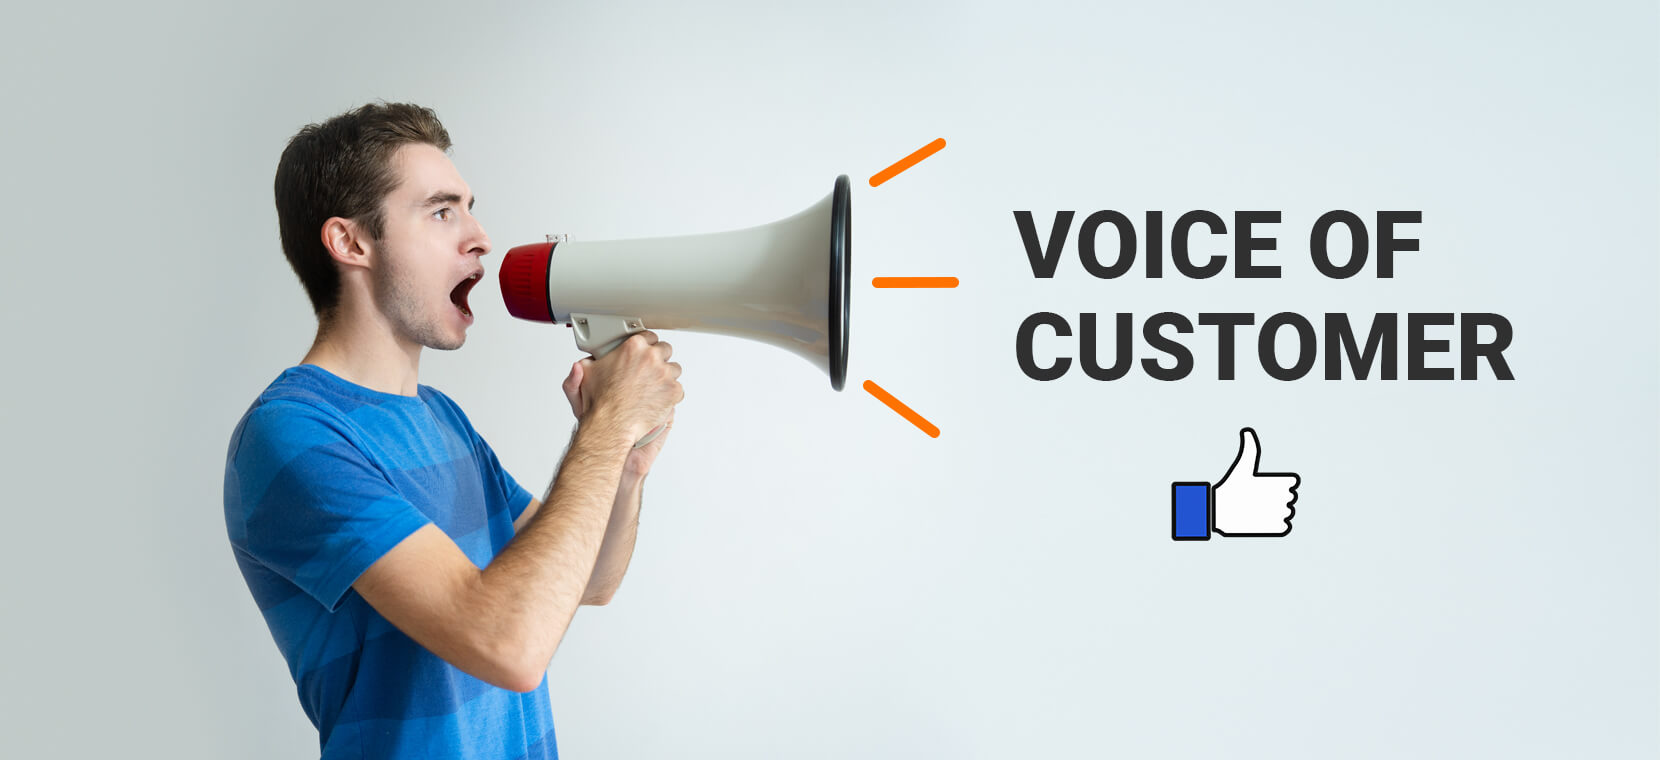 The Voice of Customer (VOC): Why your Business Should Listen